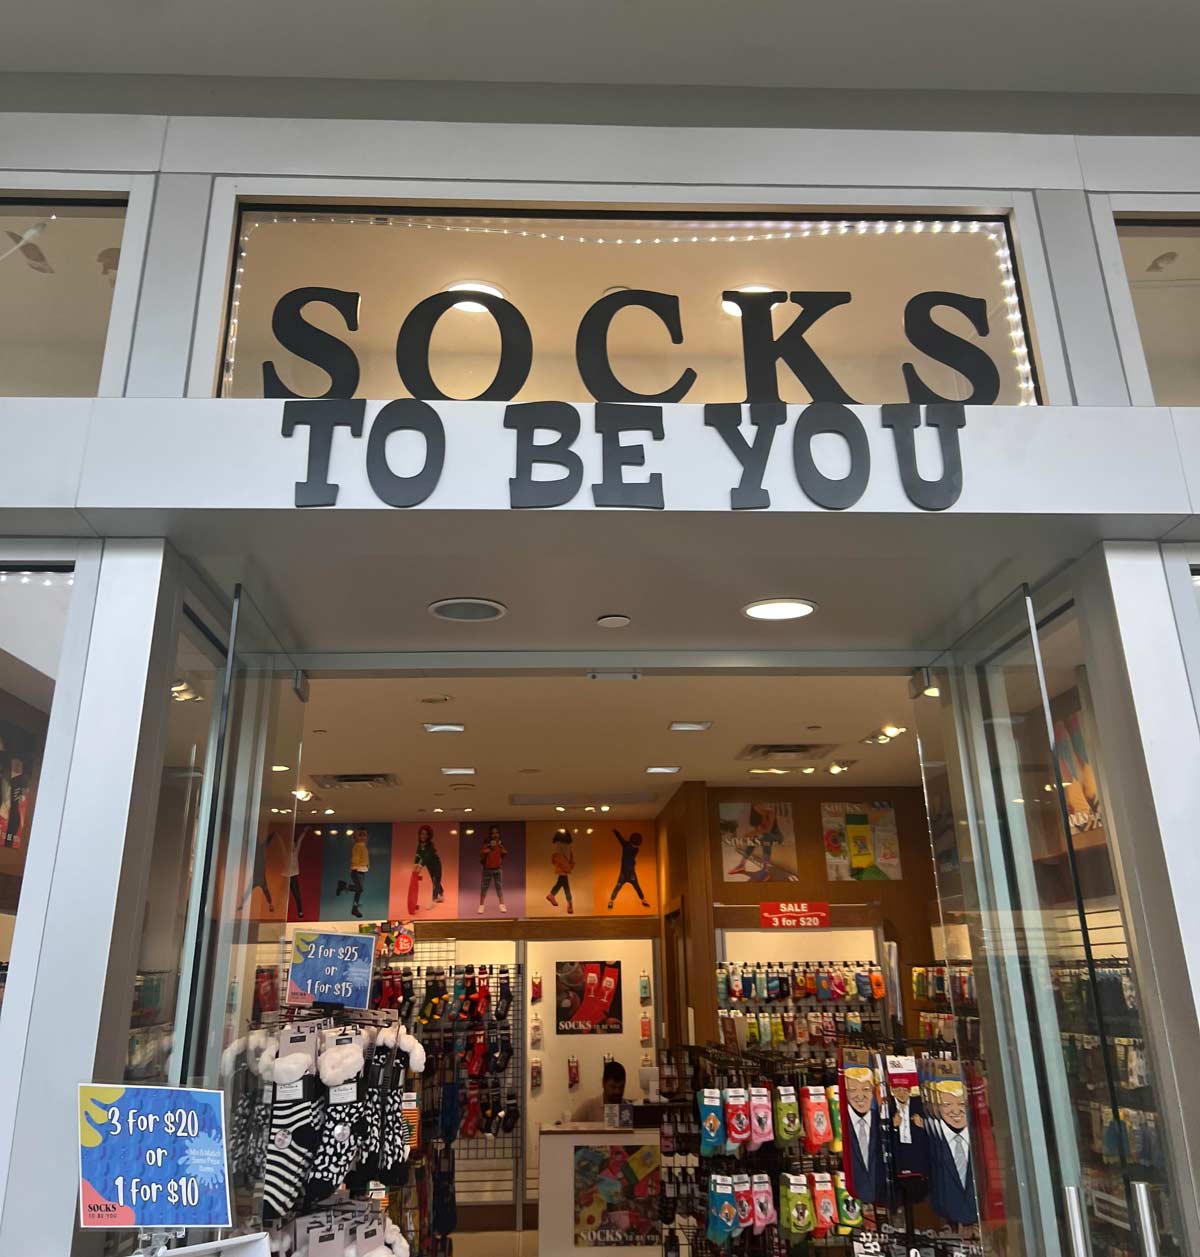 This sock shop